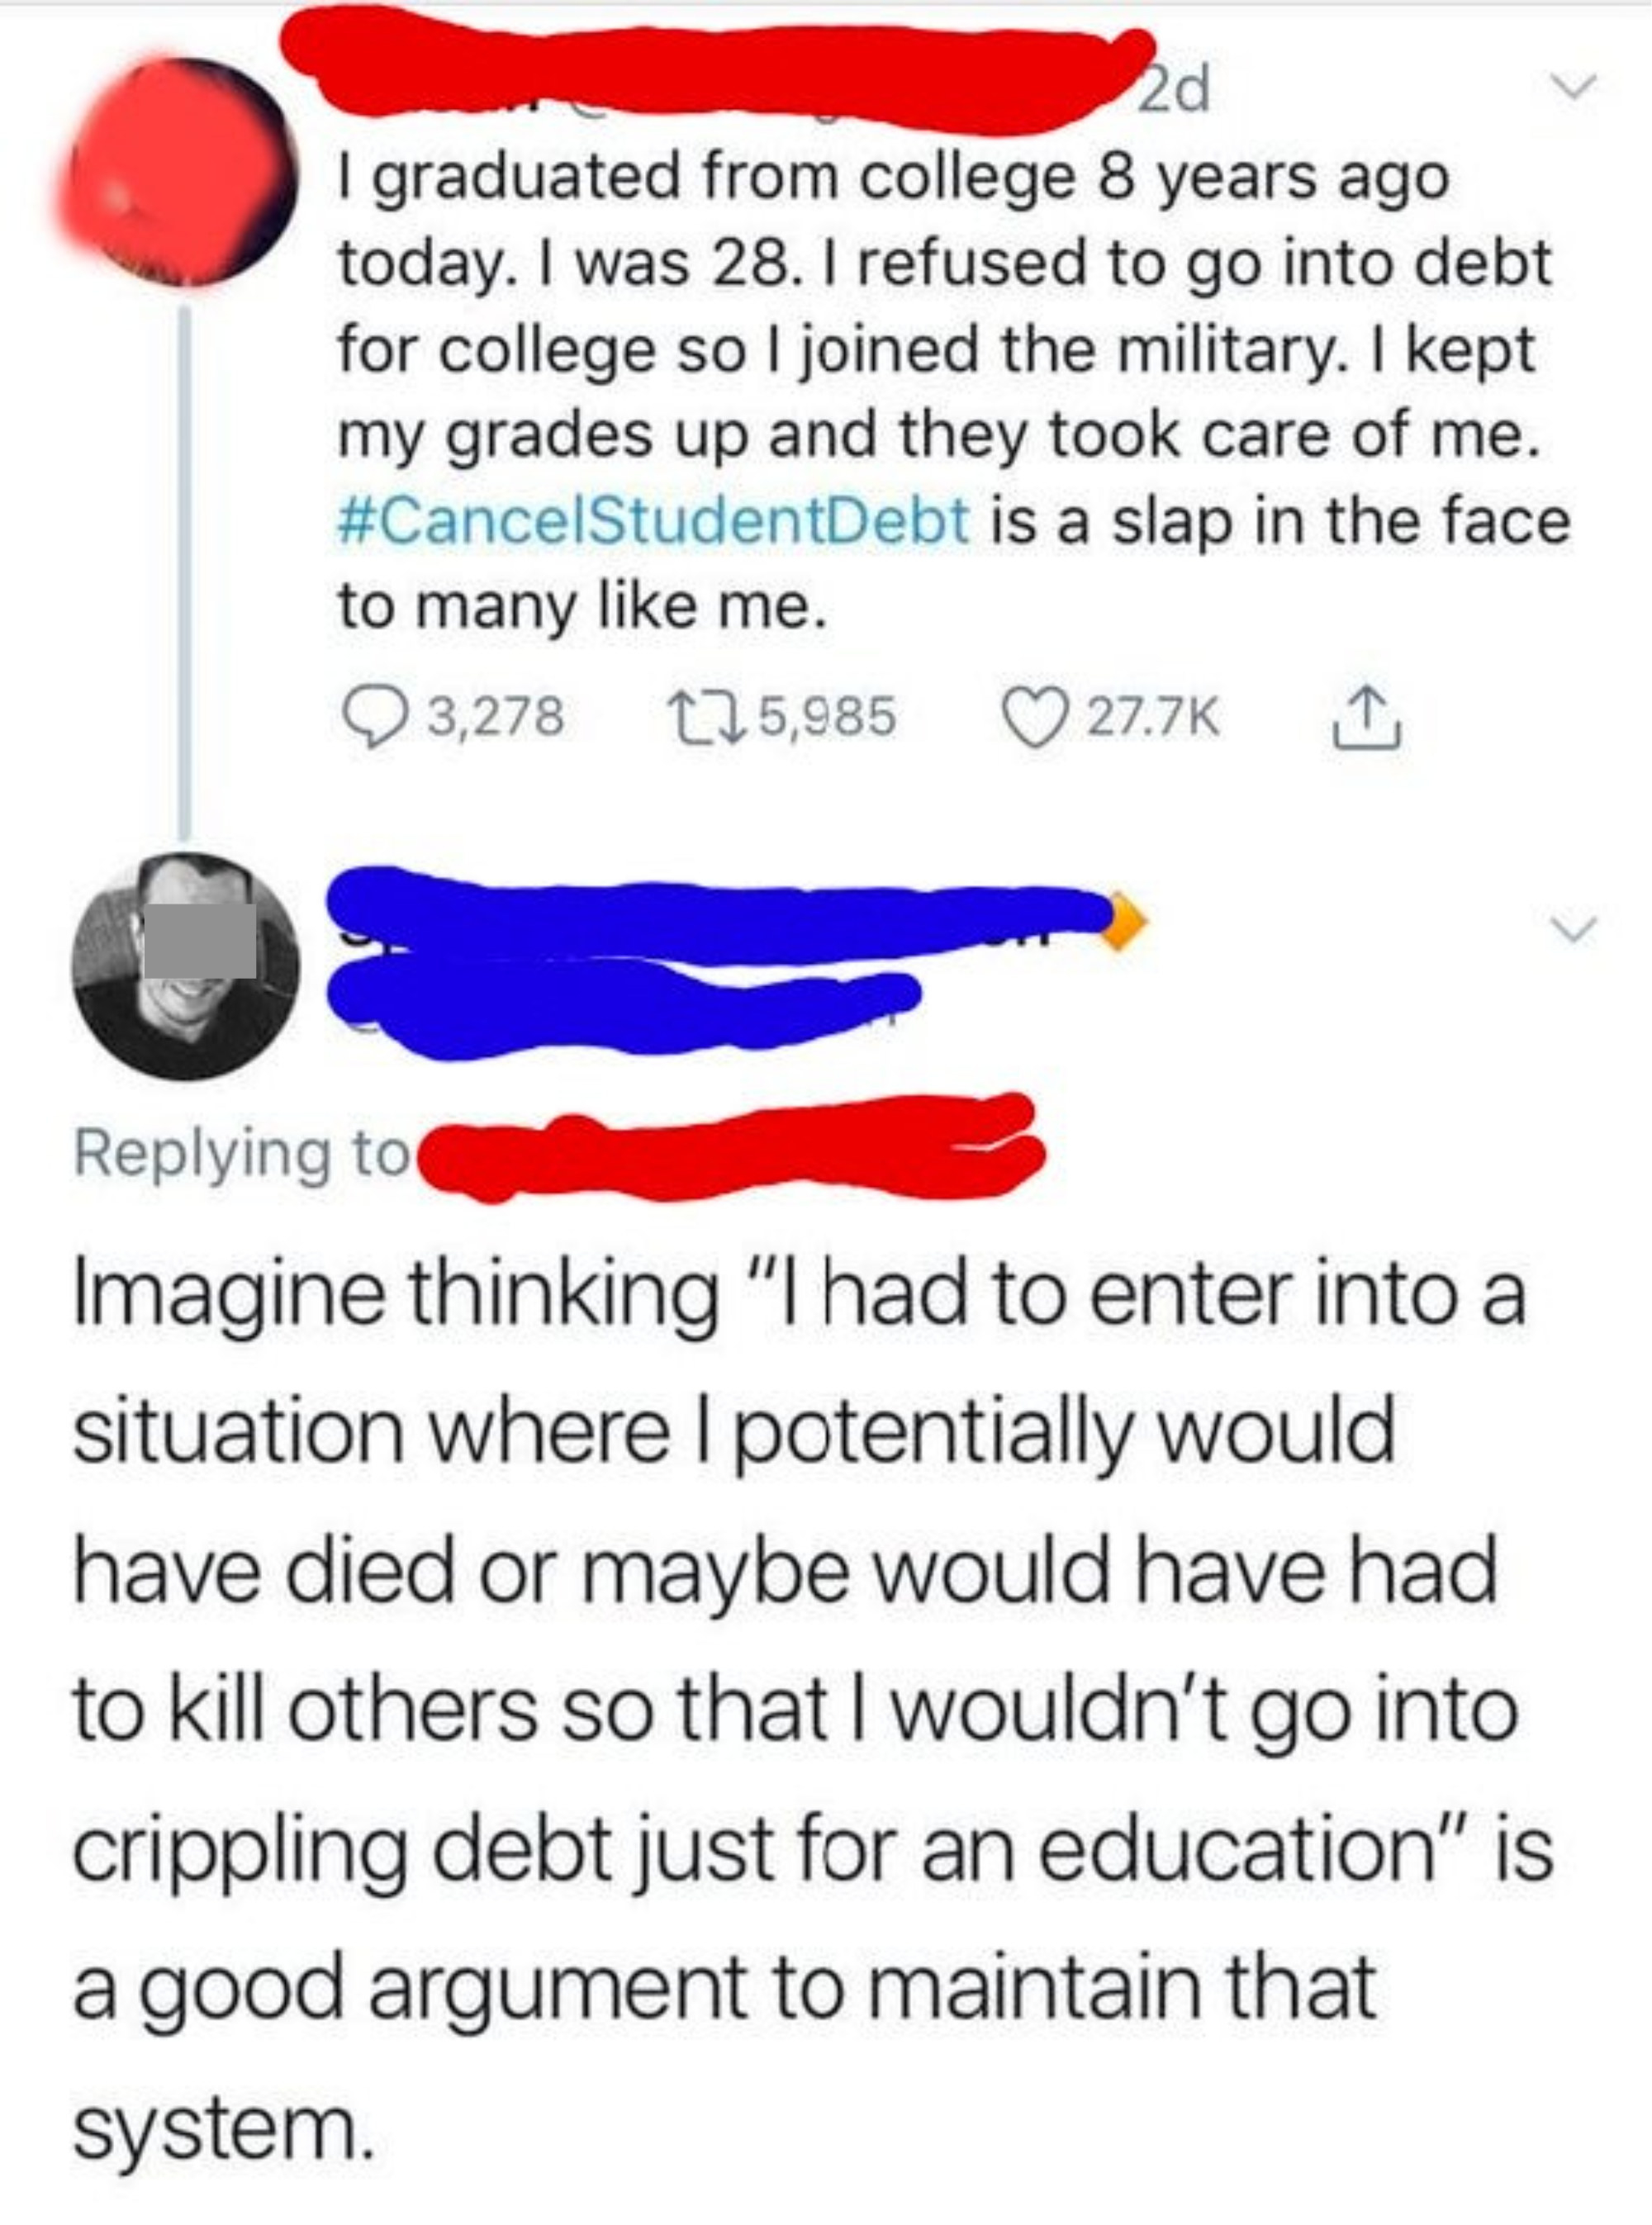 someone saying they joined the military in order to be debt free so it&#x27;s a slap in the face to have loans cancelled